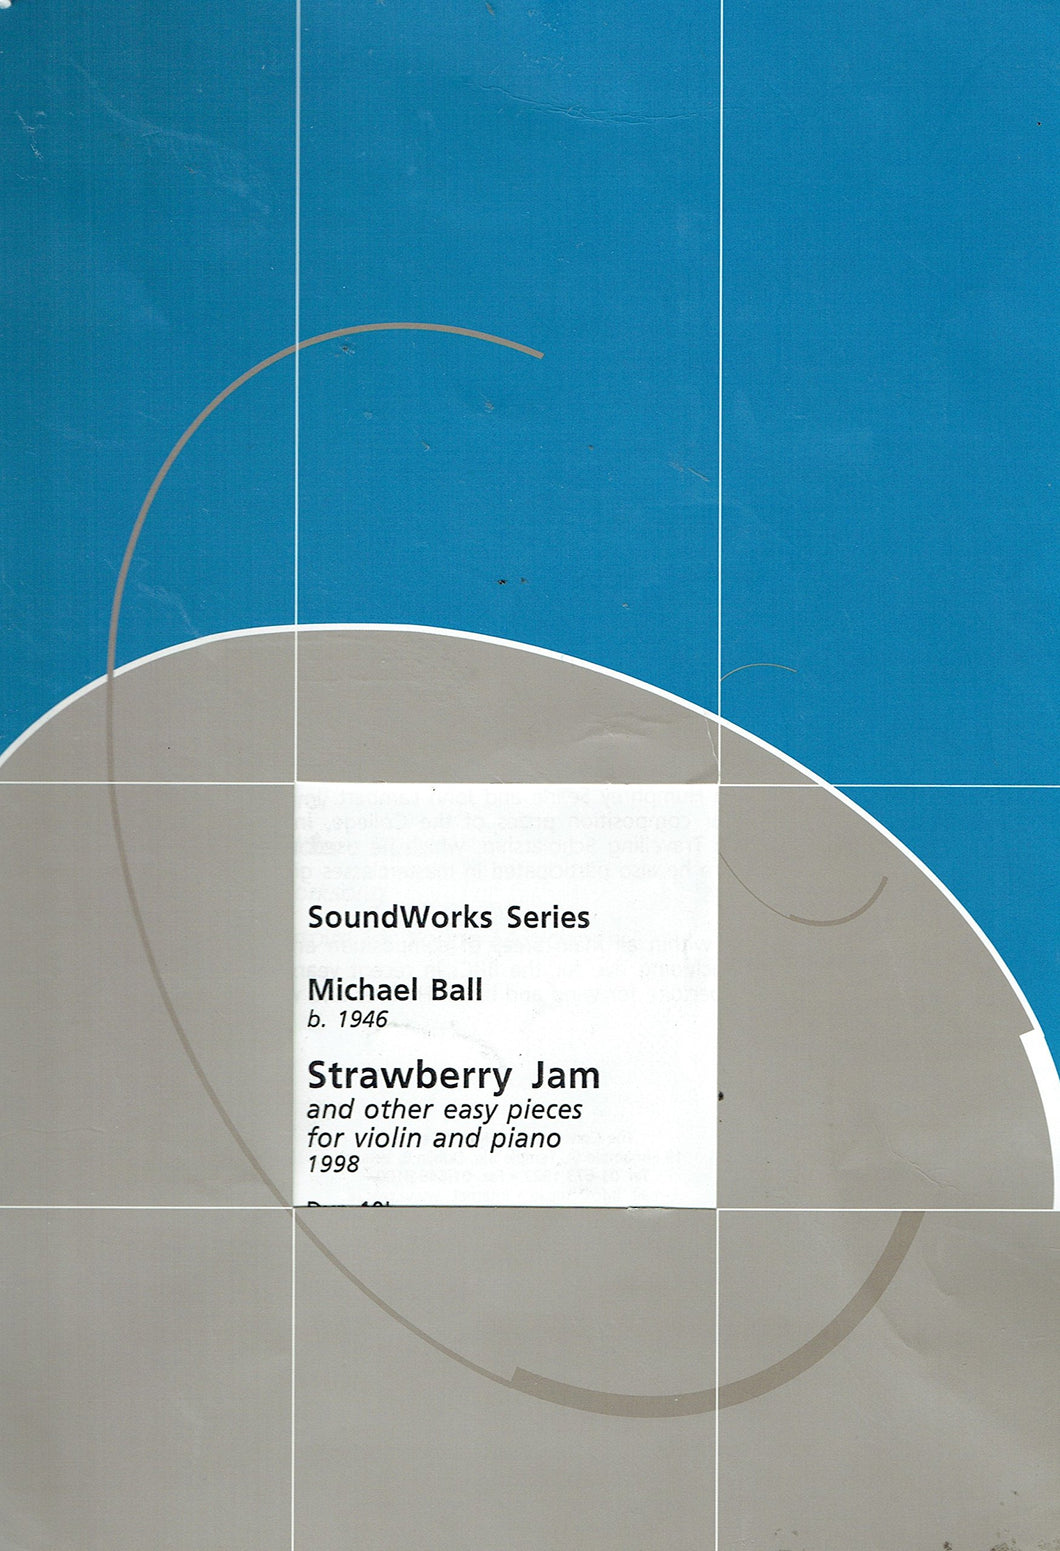 SoundWorks Series: Strawberry Jam and other easy pieces for violin and piano, 1998